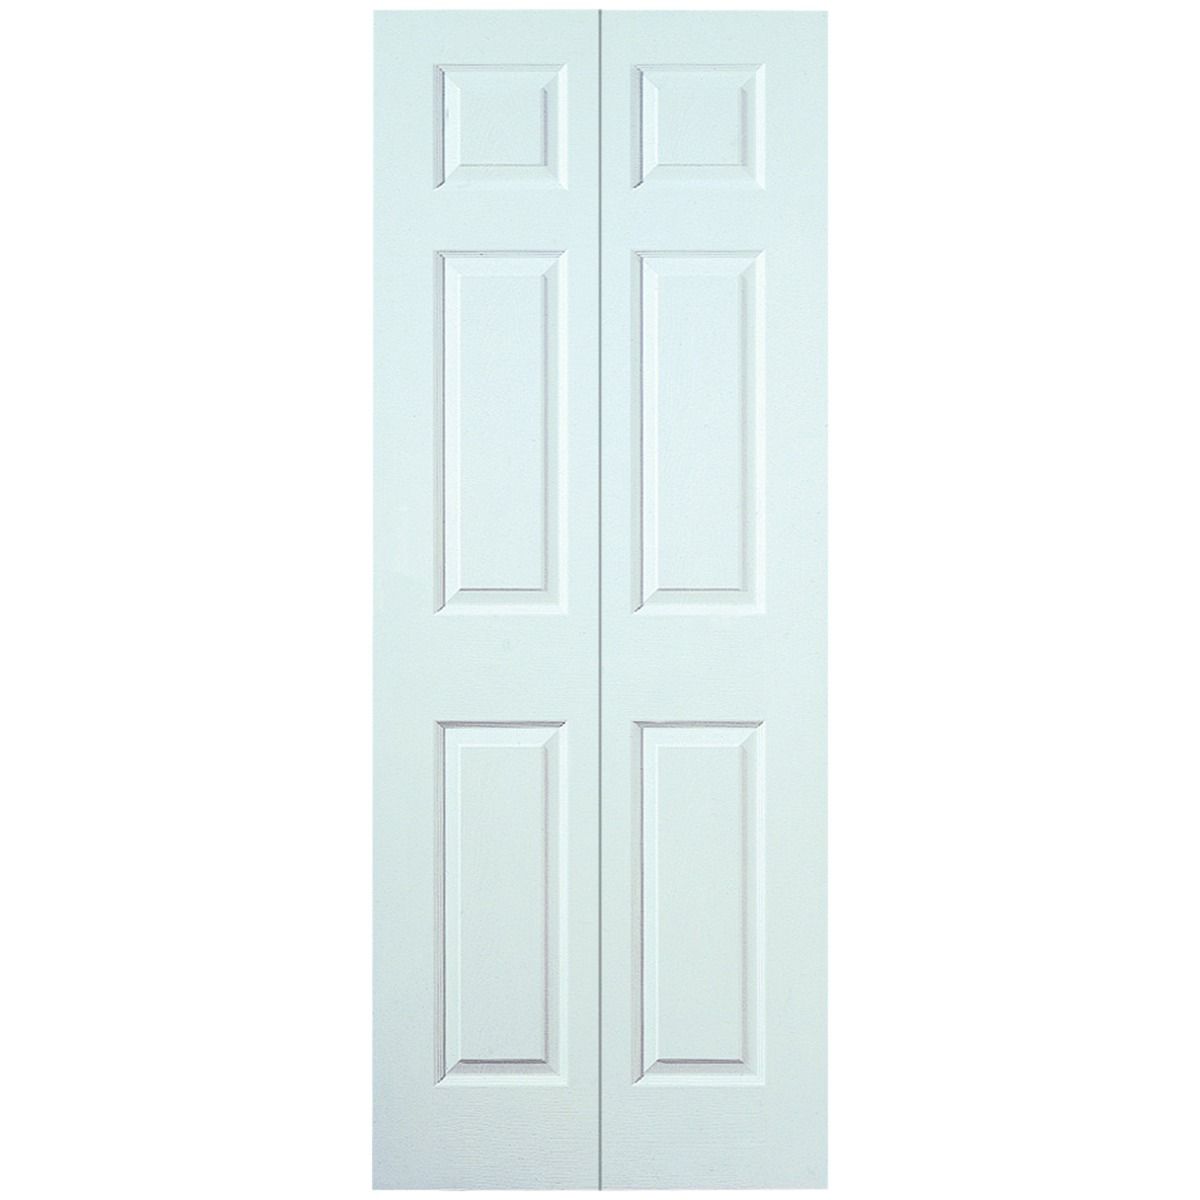 Image of Wickes Lincoln White Grained Moulded 6 Panel Internal Bi-Fold Door - 1981 x 686mm